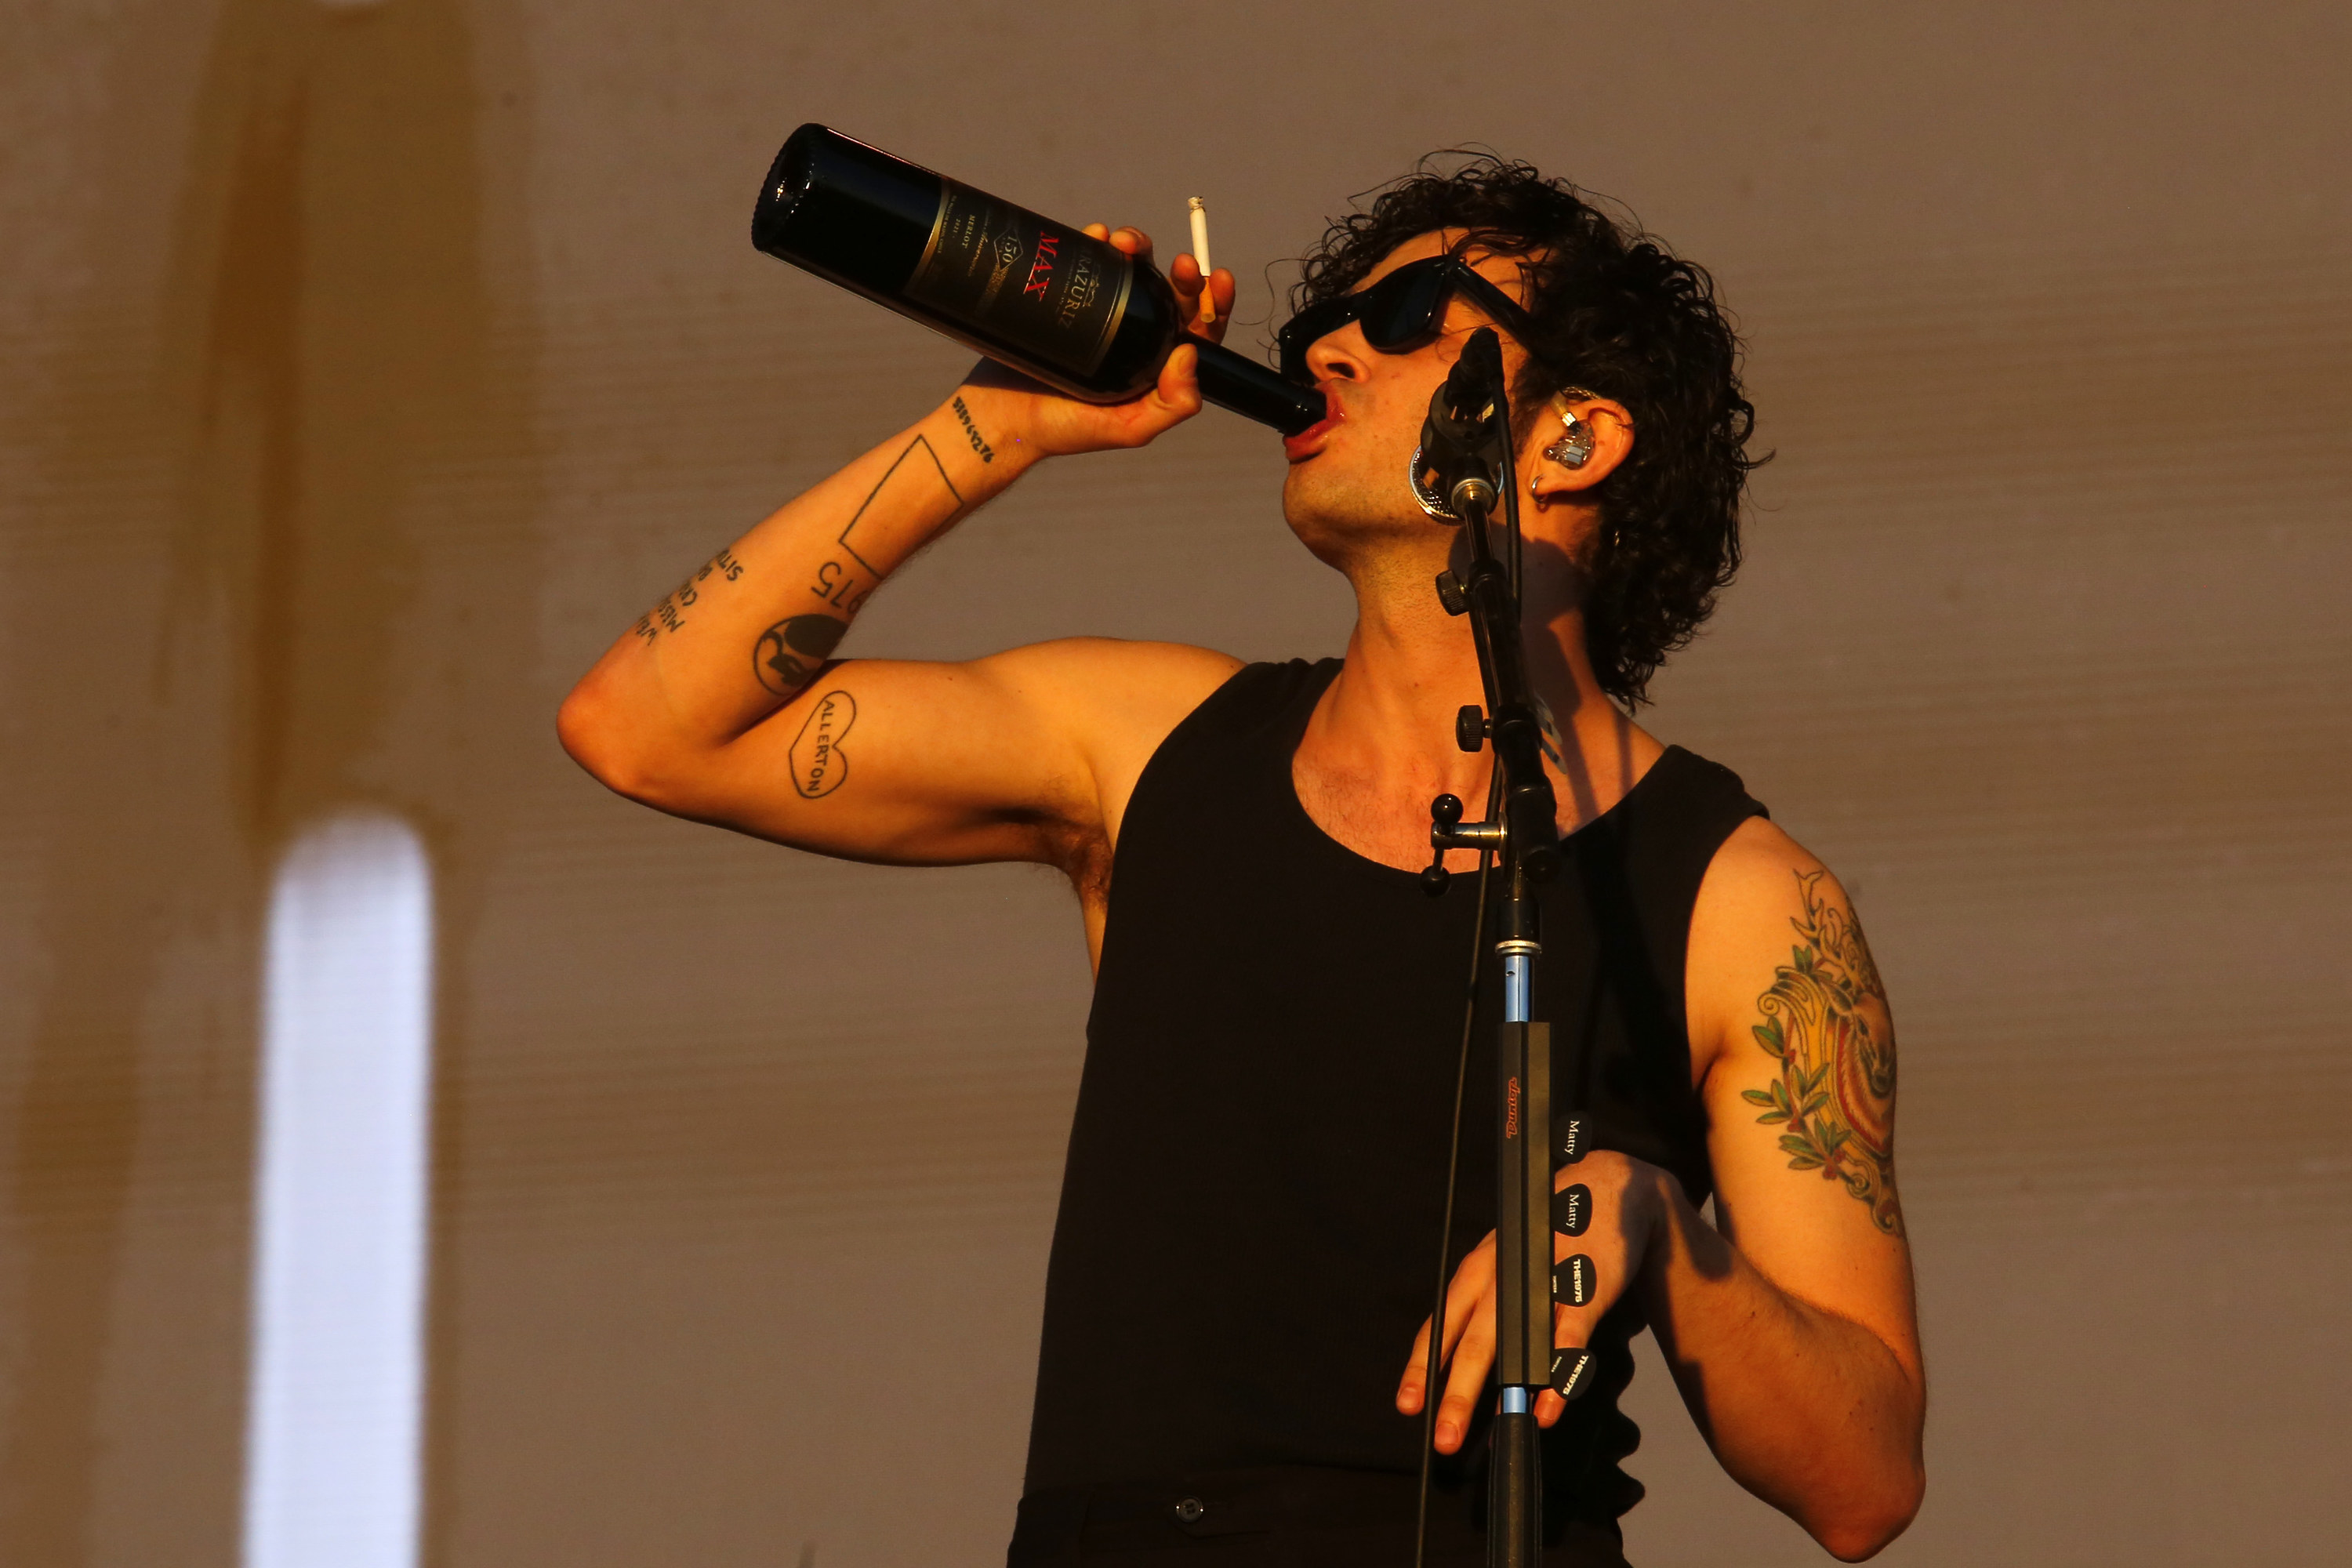 matty drinking wine from the bottle on stage